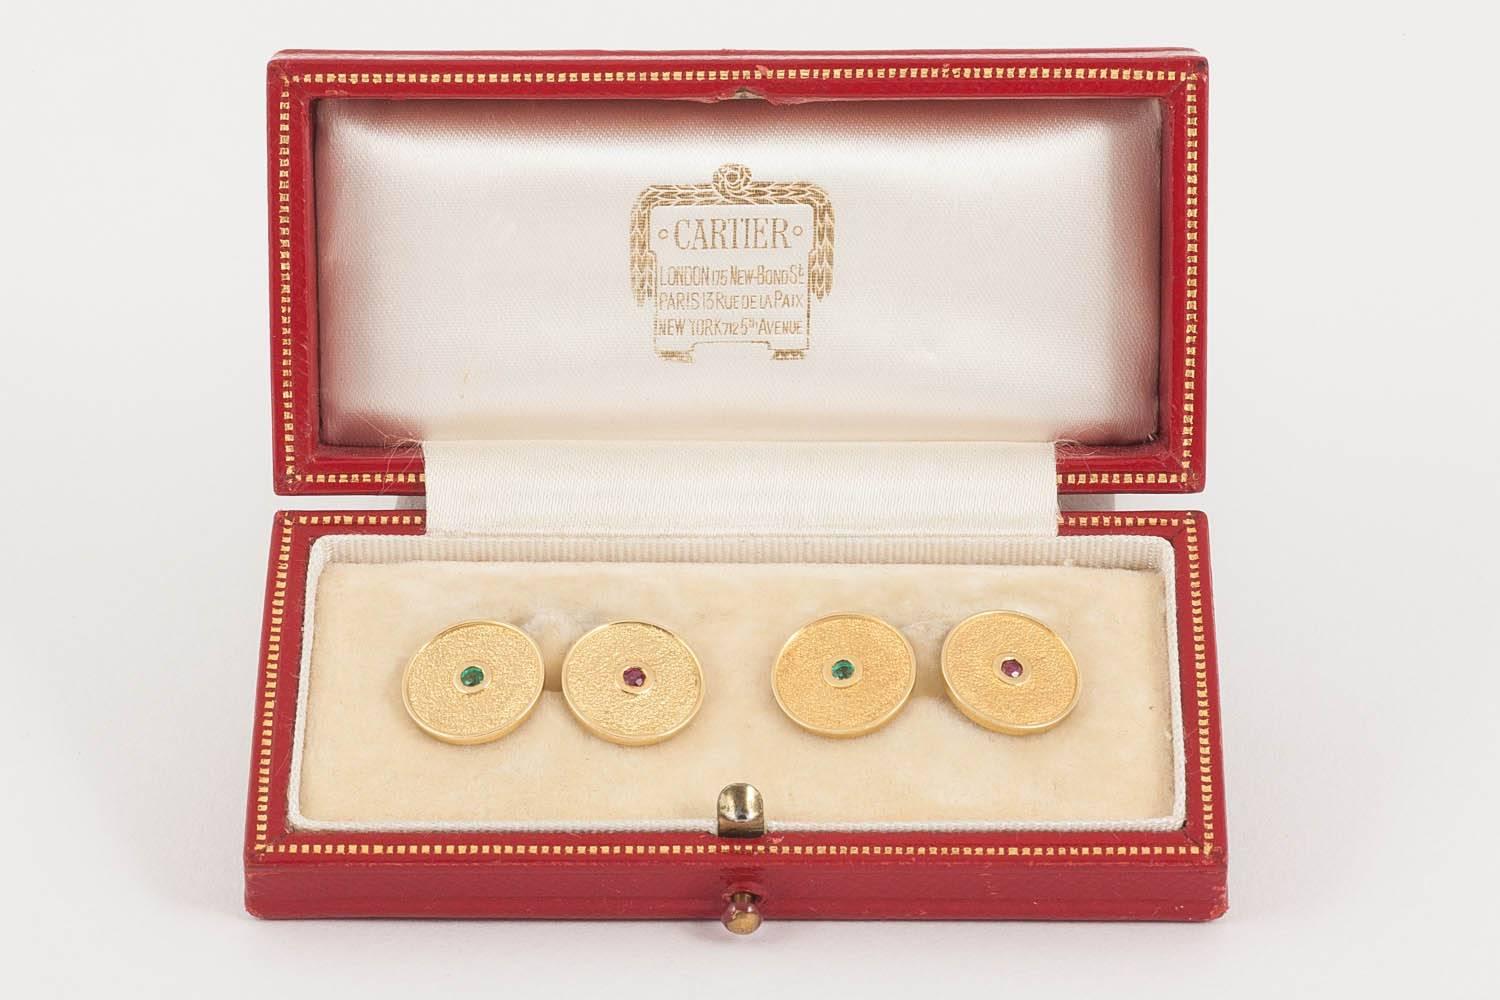 Pair of Cartier 18ct gold cufflinks ,c,1960.french marked,numbered 2418,of circular textured design,set with 2 emeralds and 2 rubies,original Cartier case